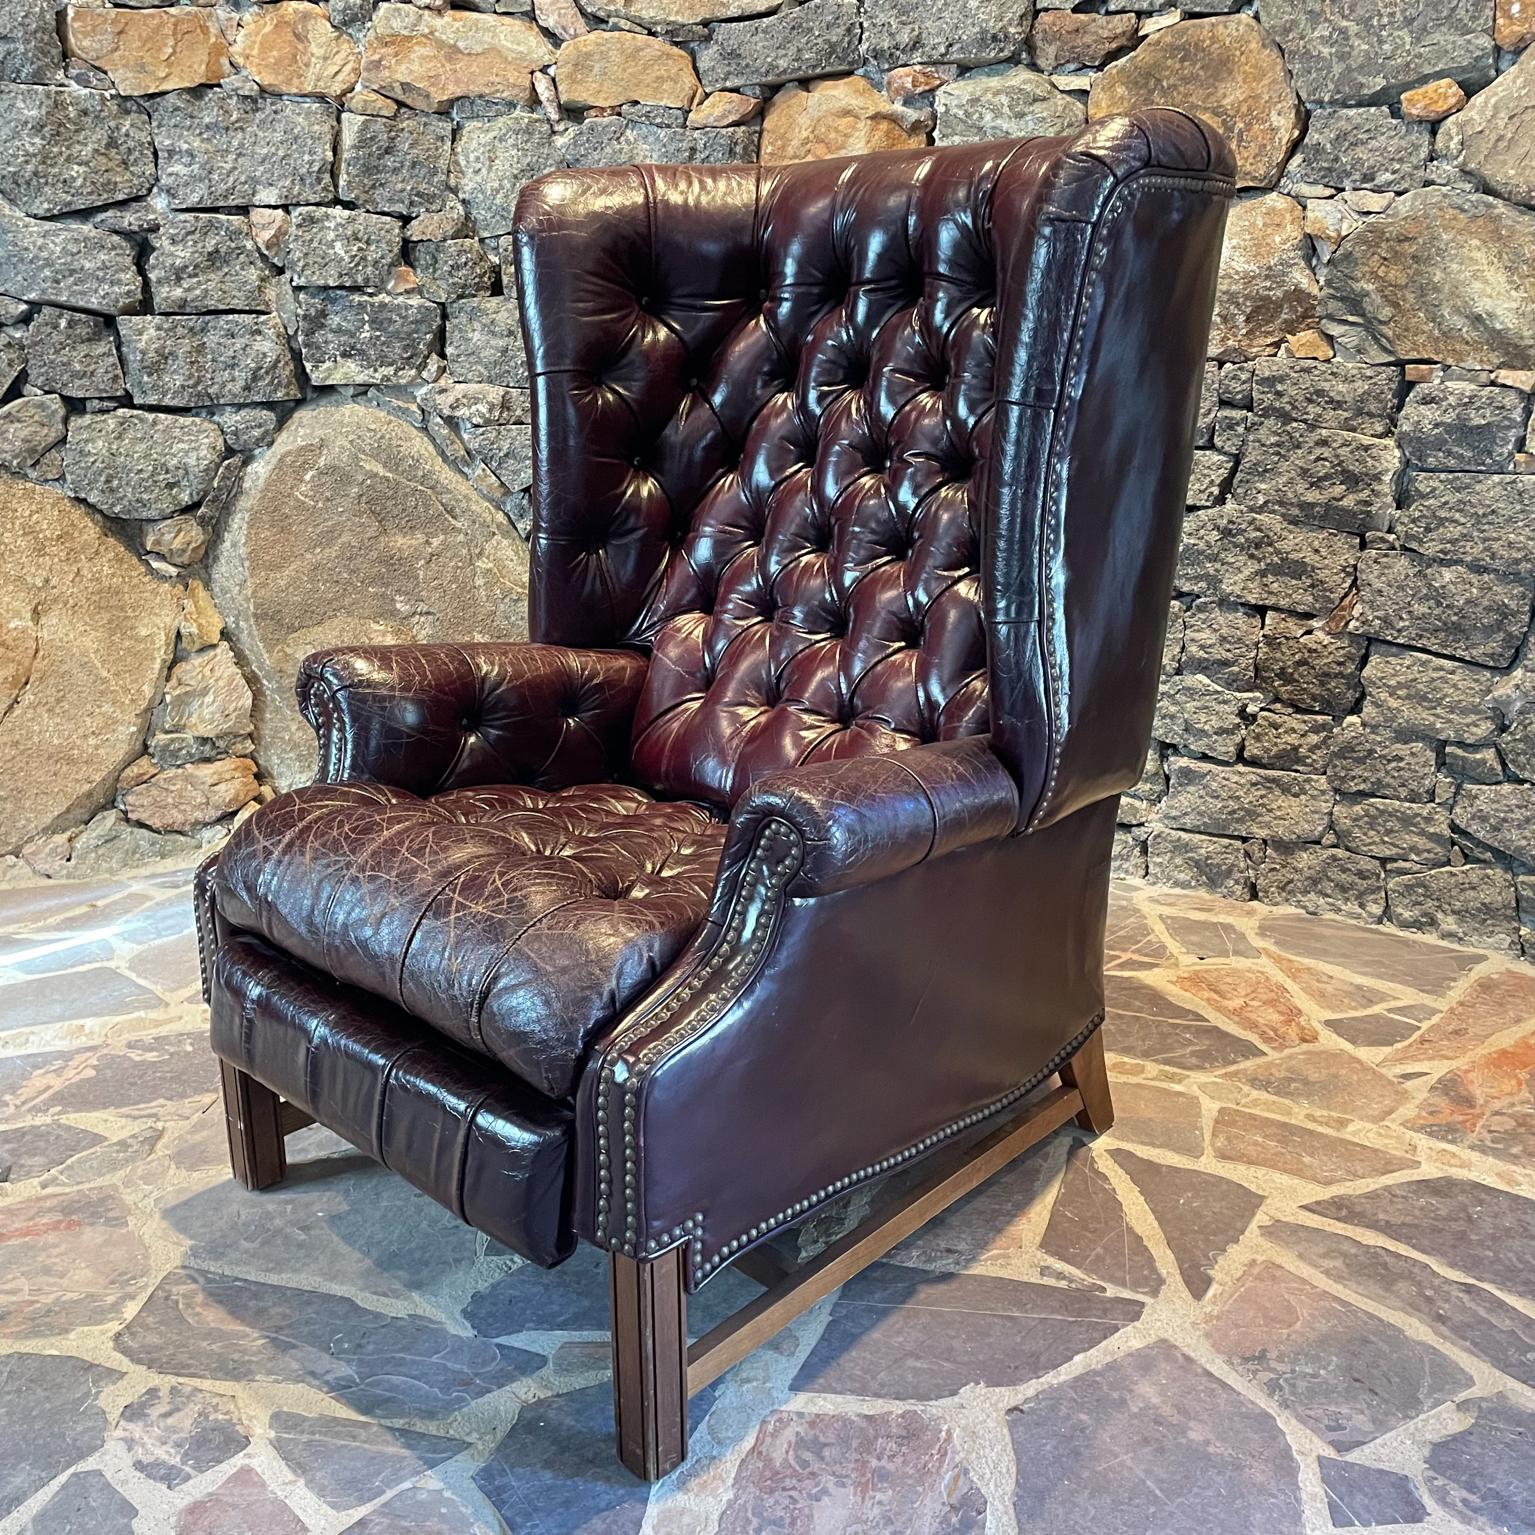 1960s Famed Barcalounger Leather Chesterfield Recliner North Carolina 1